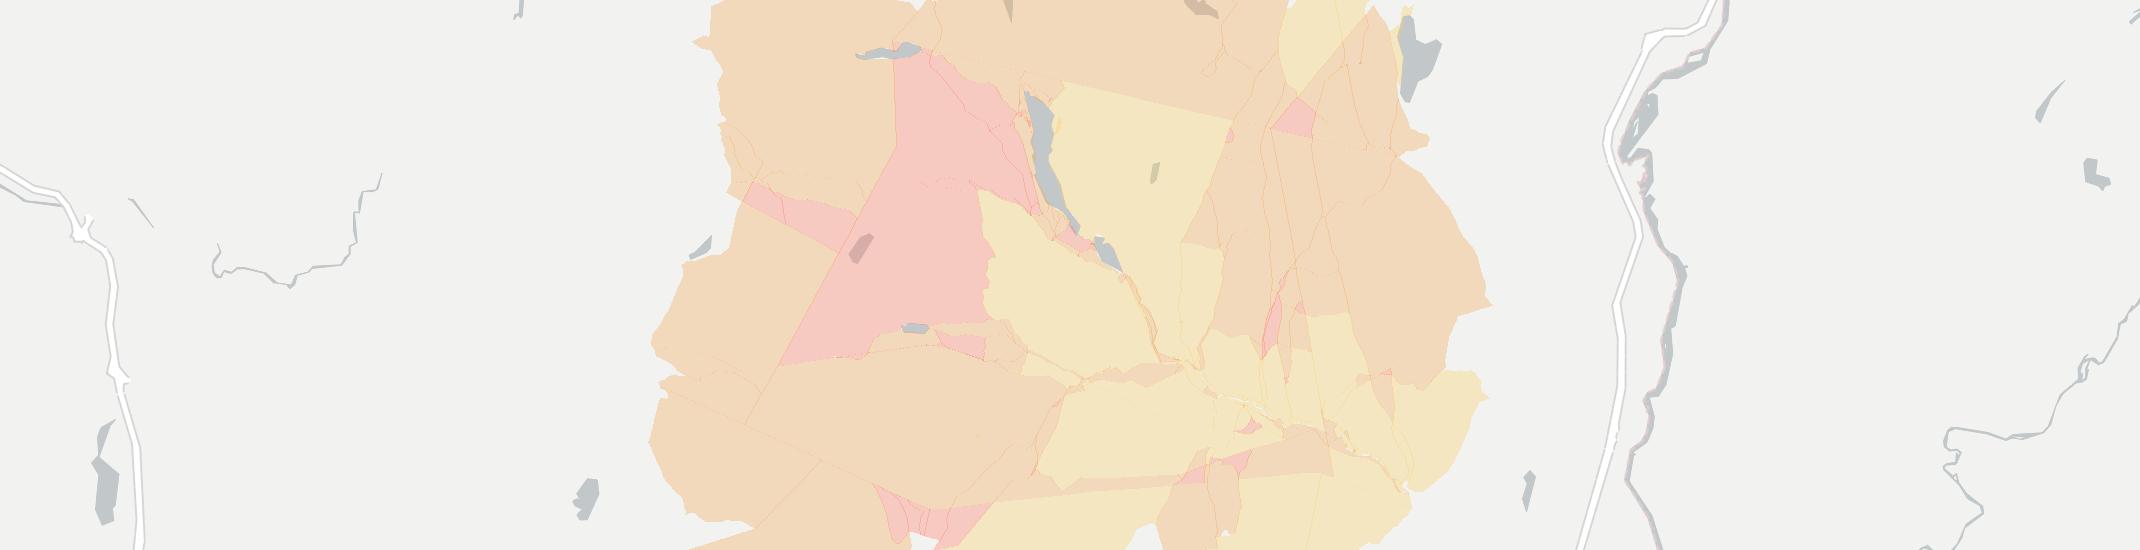 Groton Internet Competition Map. Click for interactive map